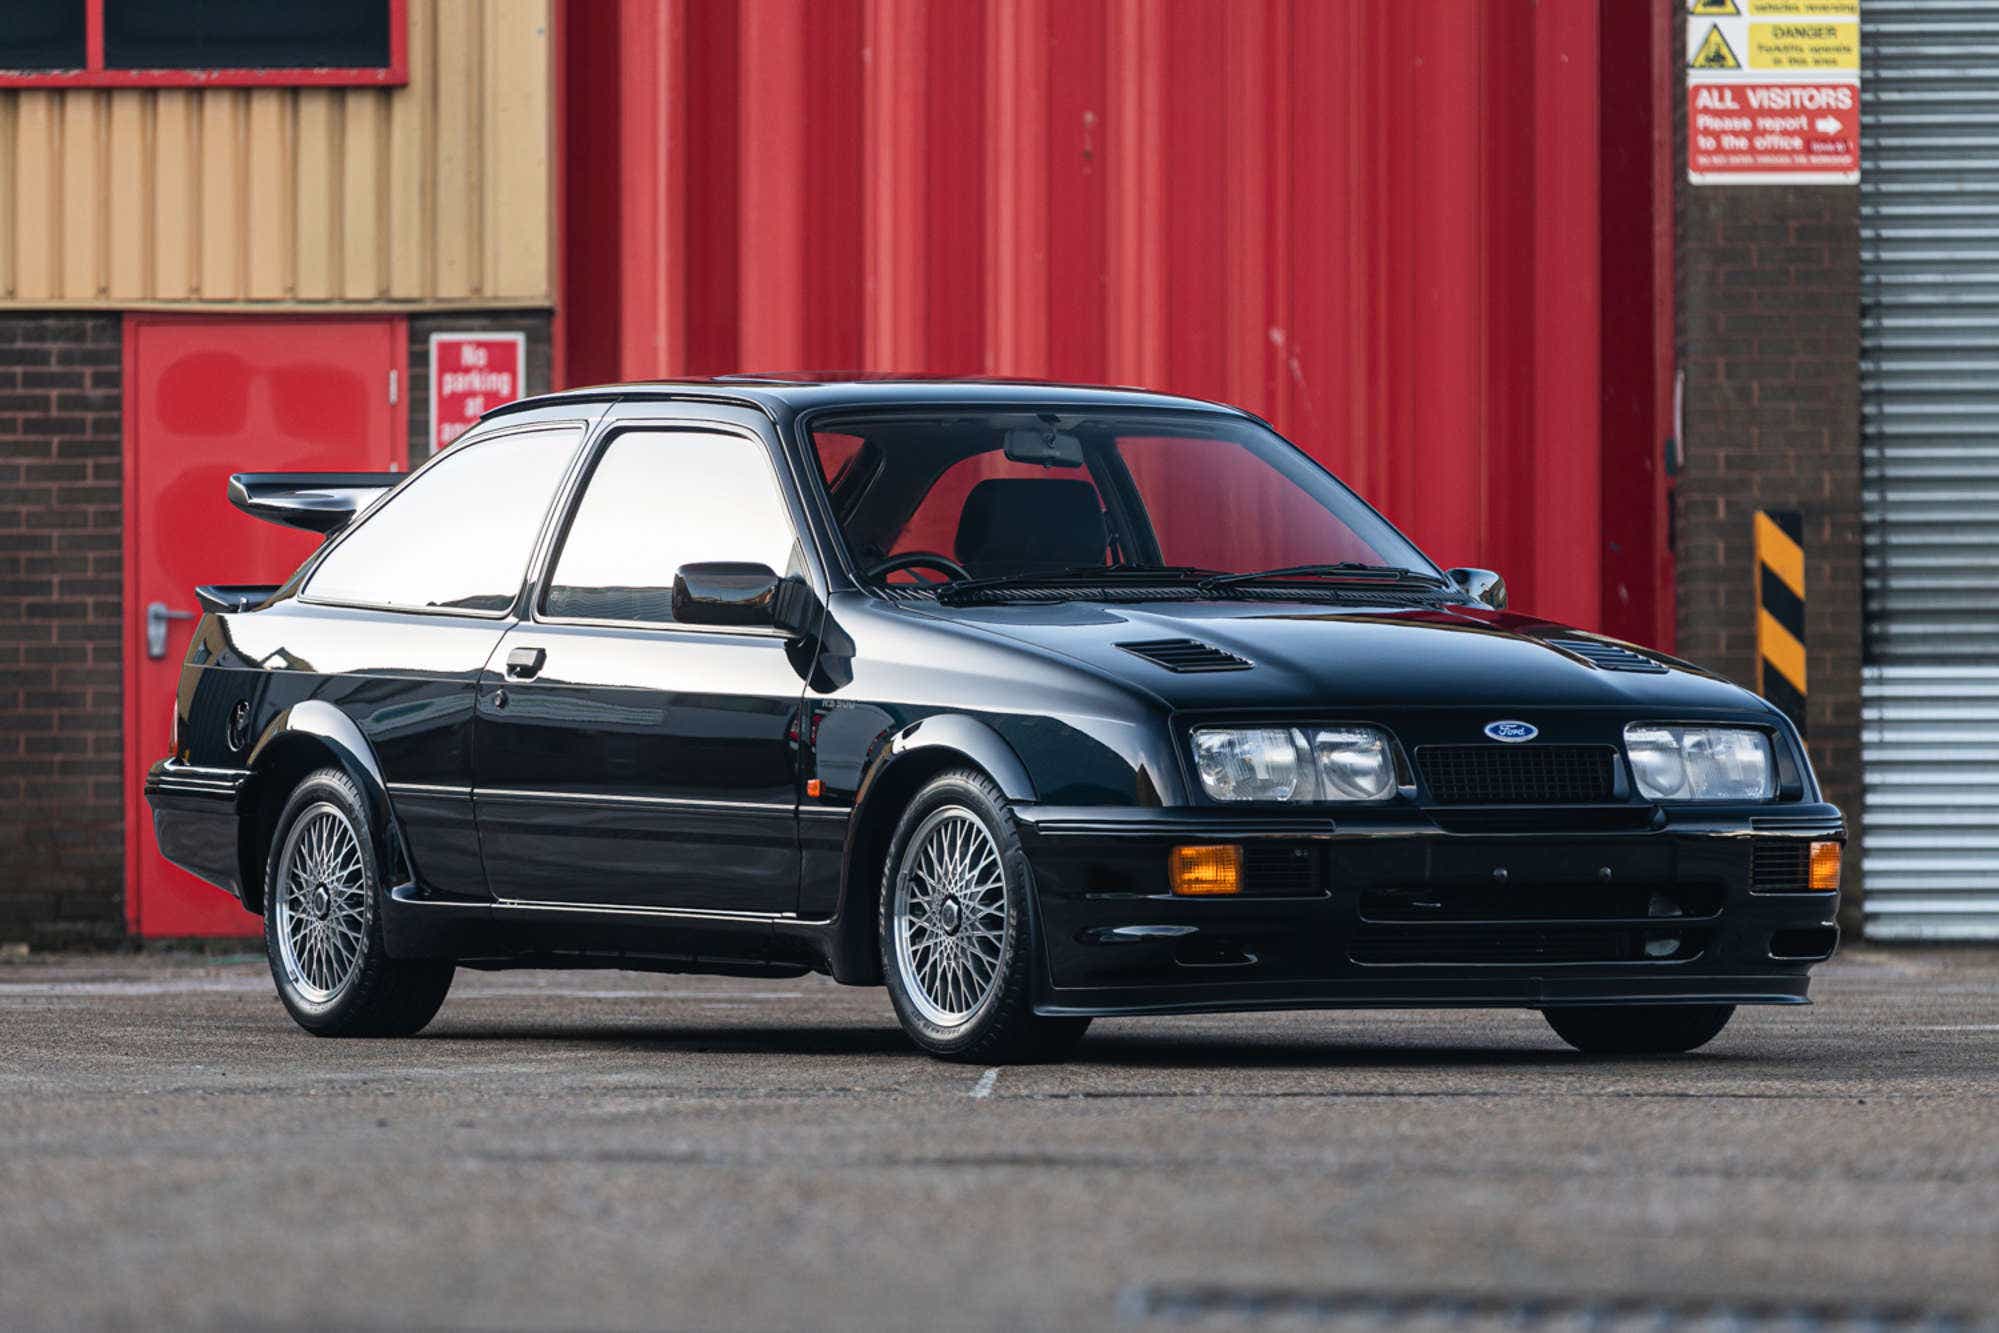 The Sierra Cosworth sold for almost £600,000. (Silverstone Auctions)